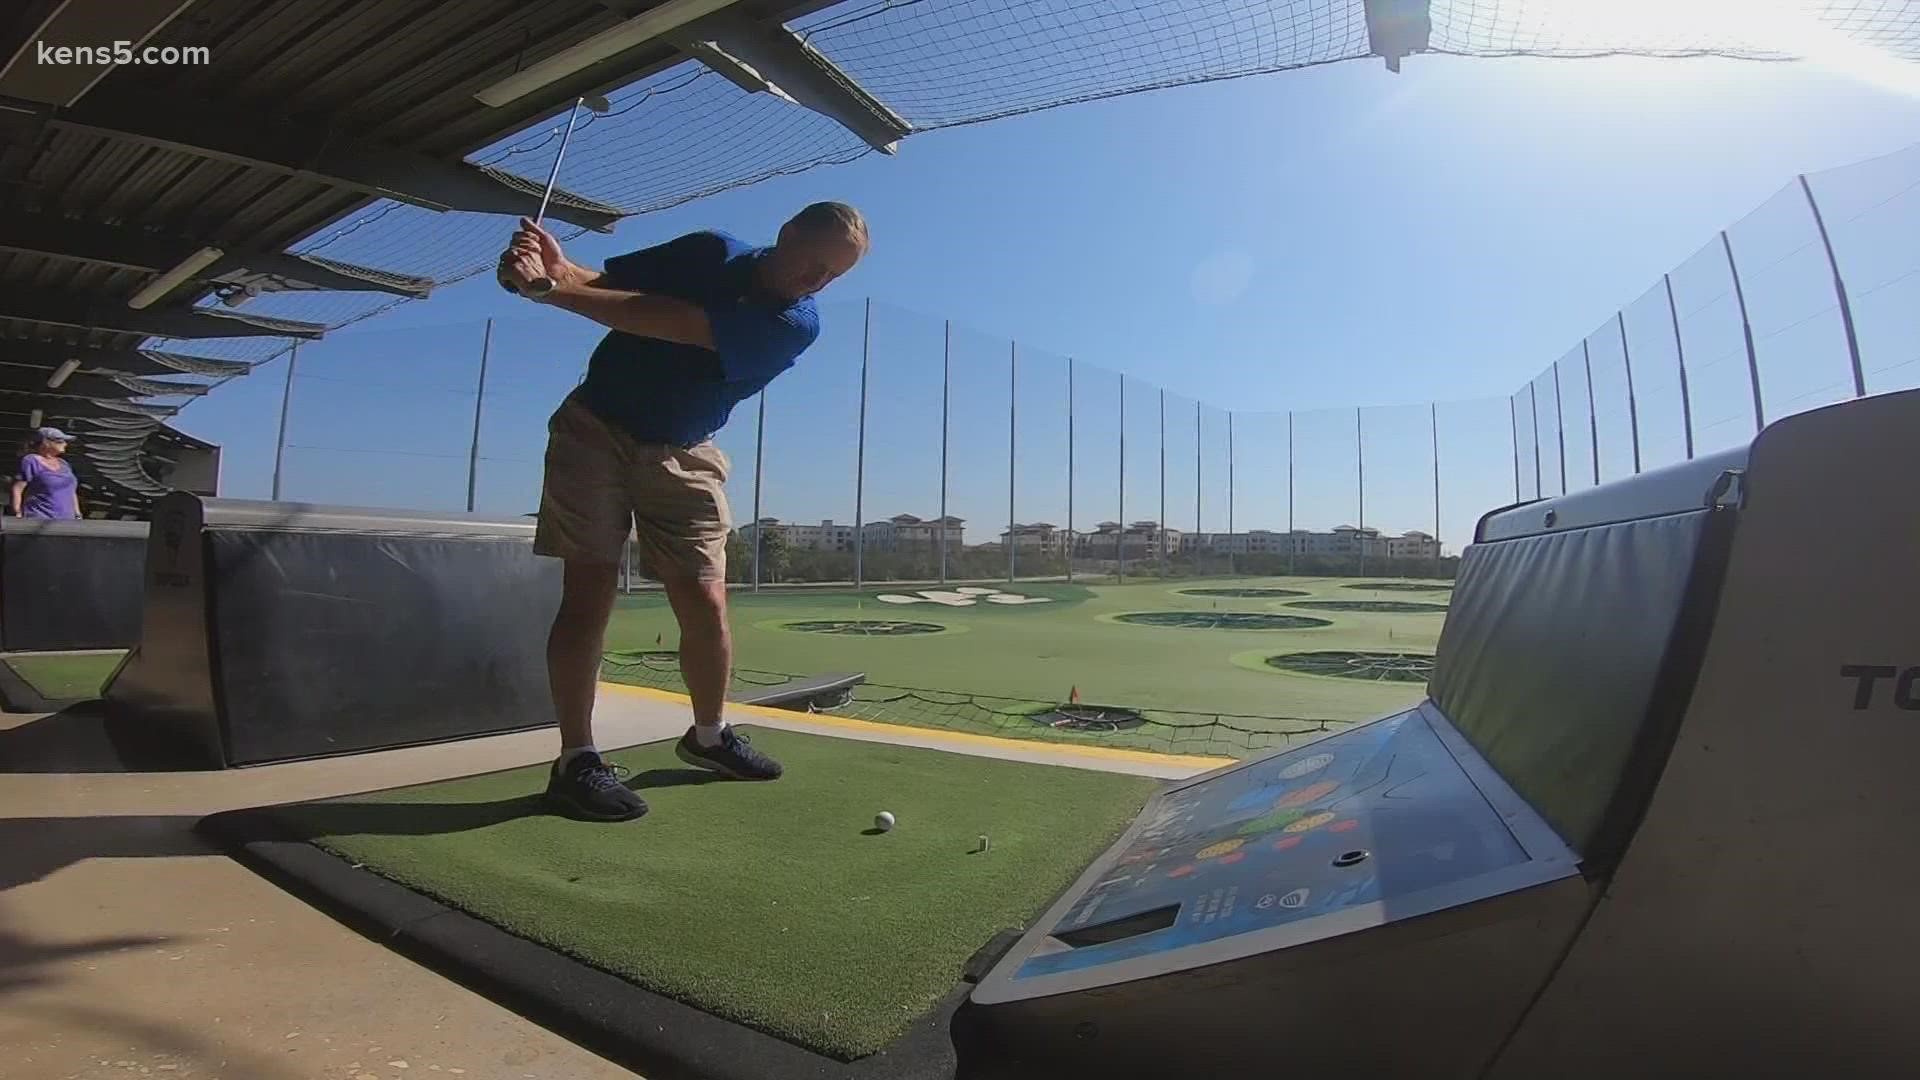 TEXAS OUTDOORS: Even if you don't golf, it's fun at TOPGOLF! | kens5.com